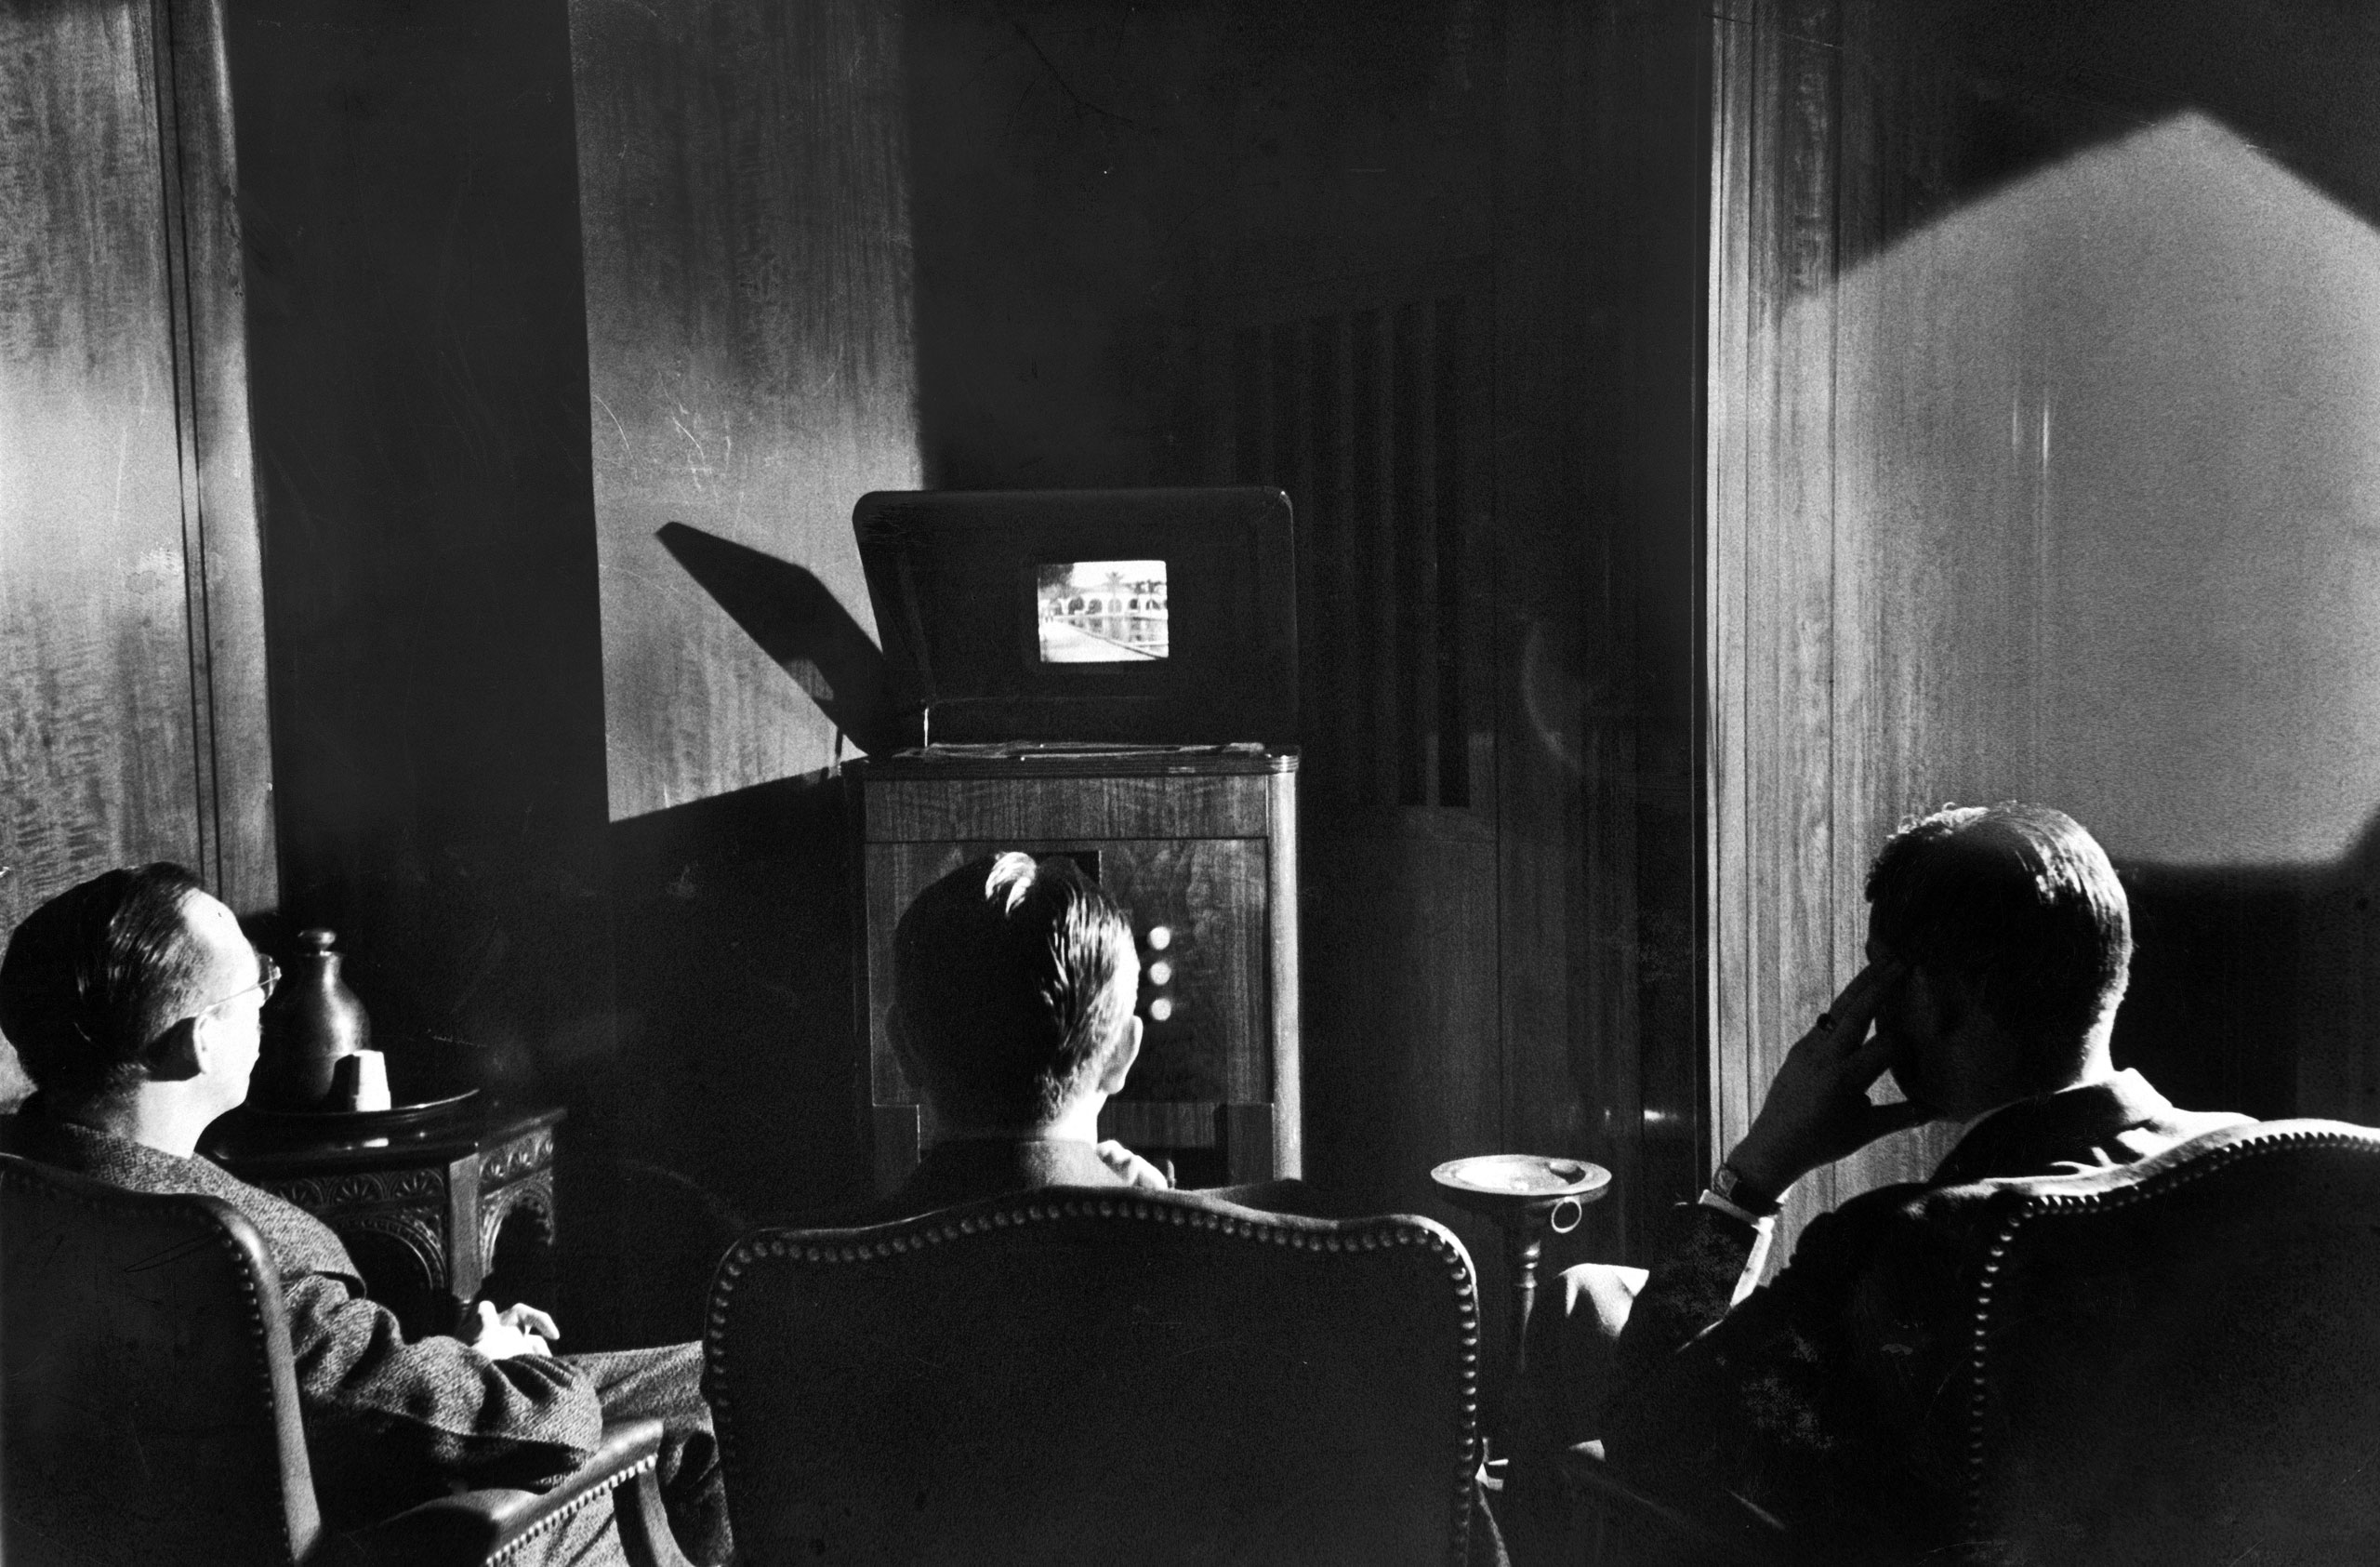 Radio Corporation of America (RCA) executives watch a brand new invention called television, their New York offices before introducing the product to the public, 1939.